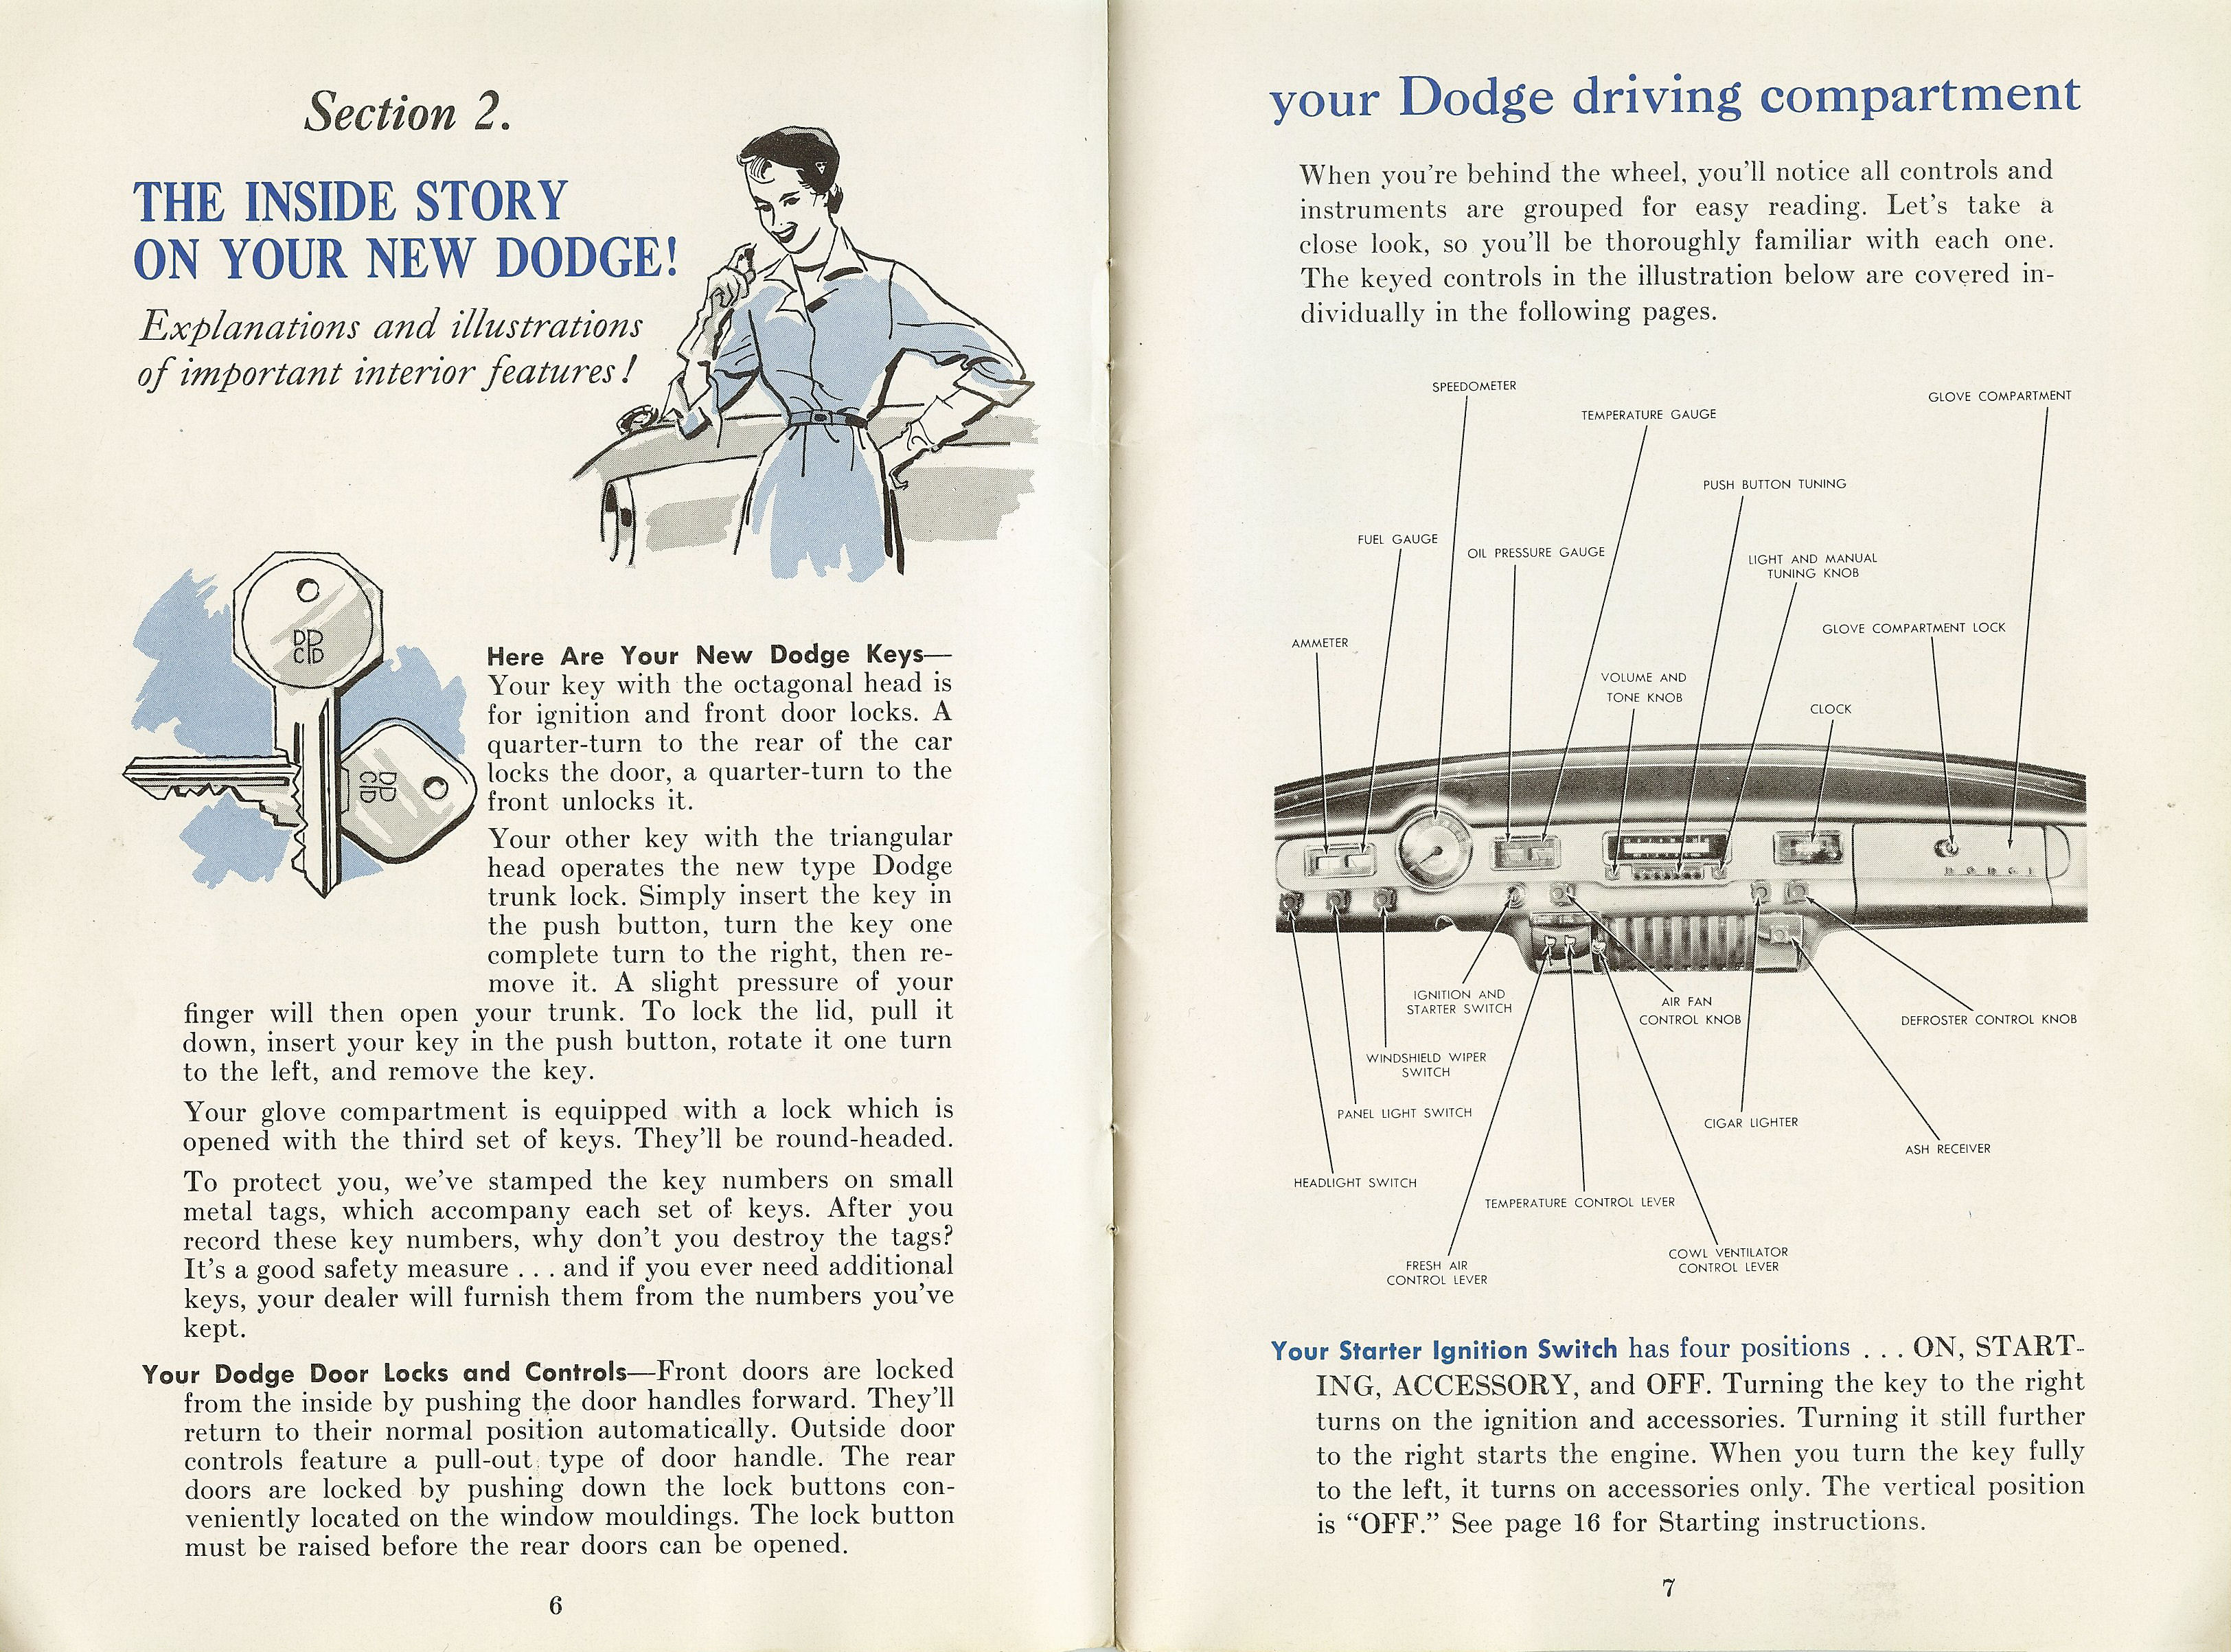 1954 Dodge Owners Manual-06-07